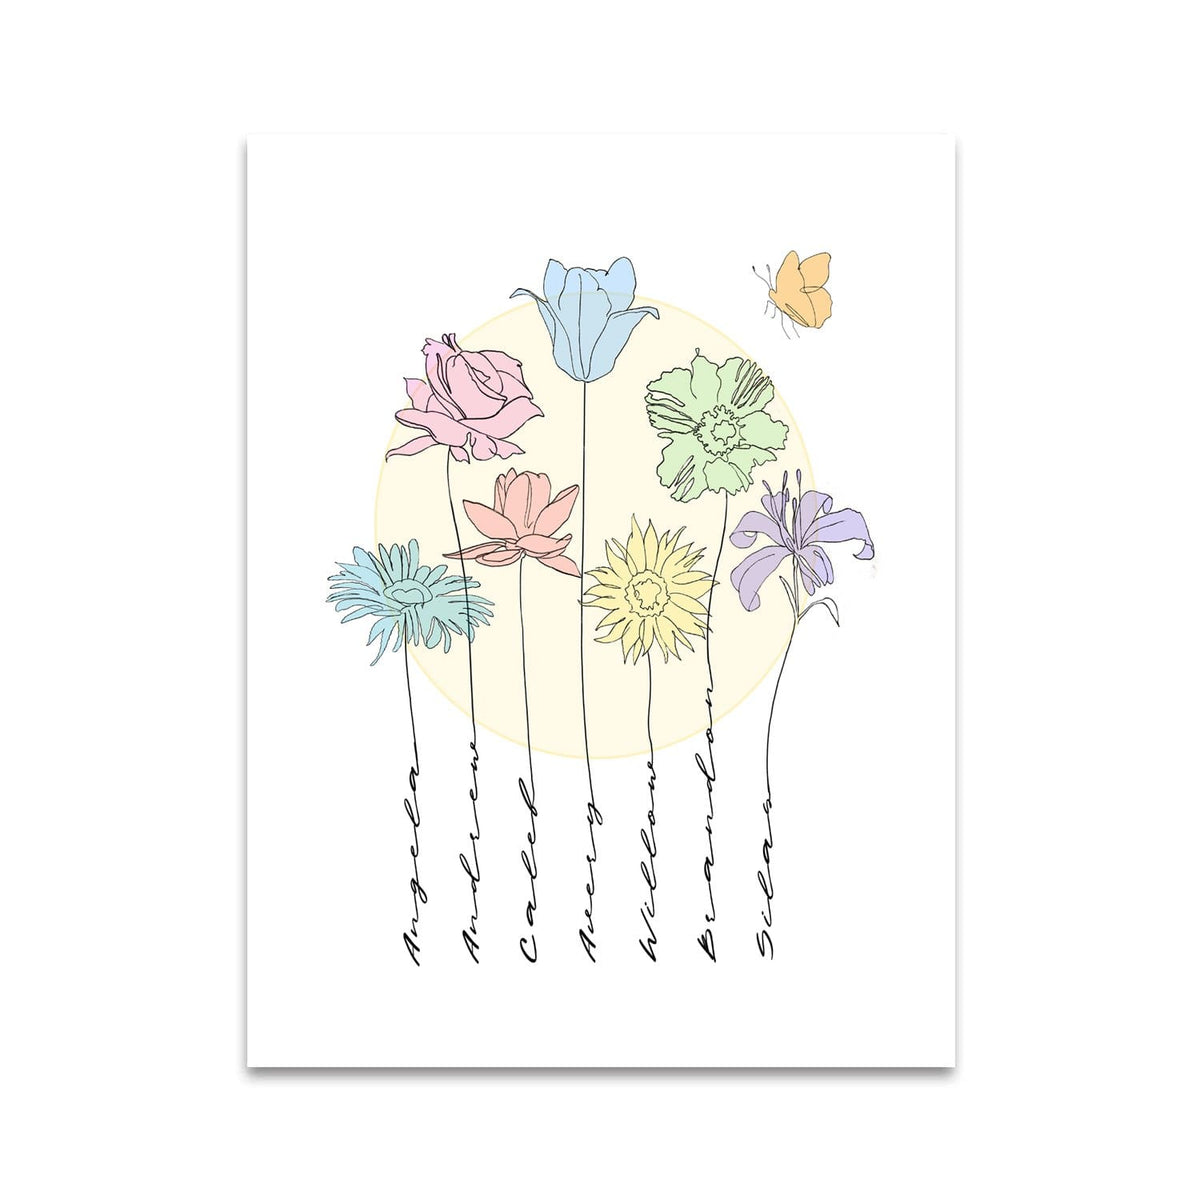 Flower art with personalized names on stems